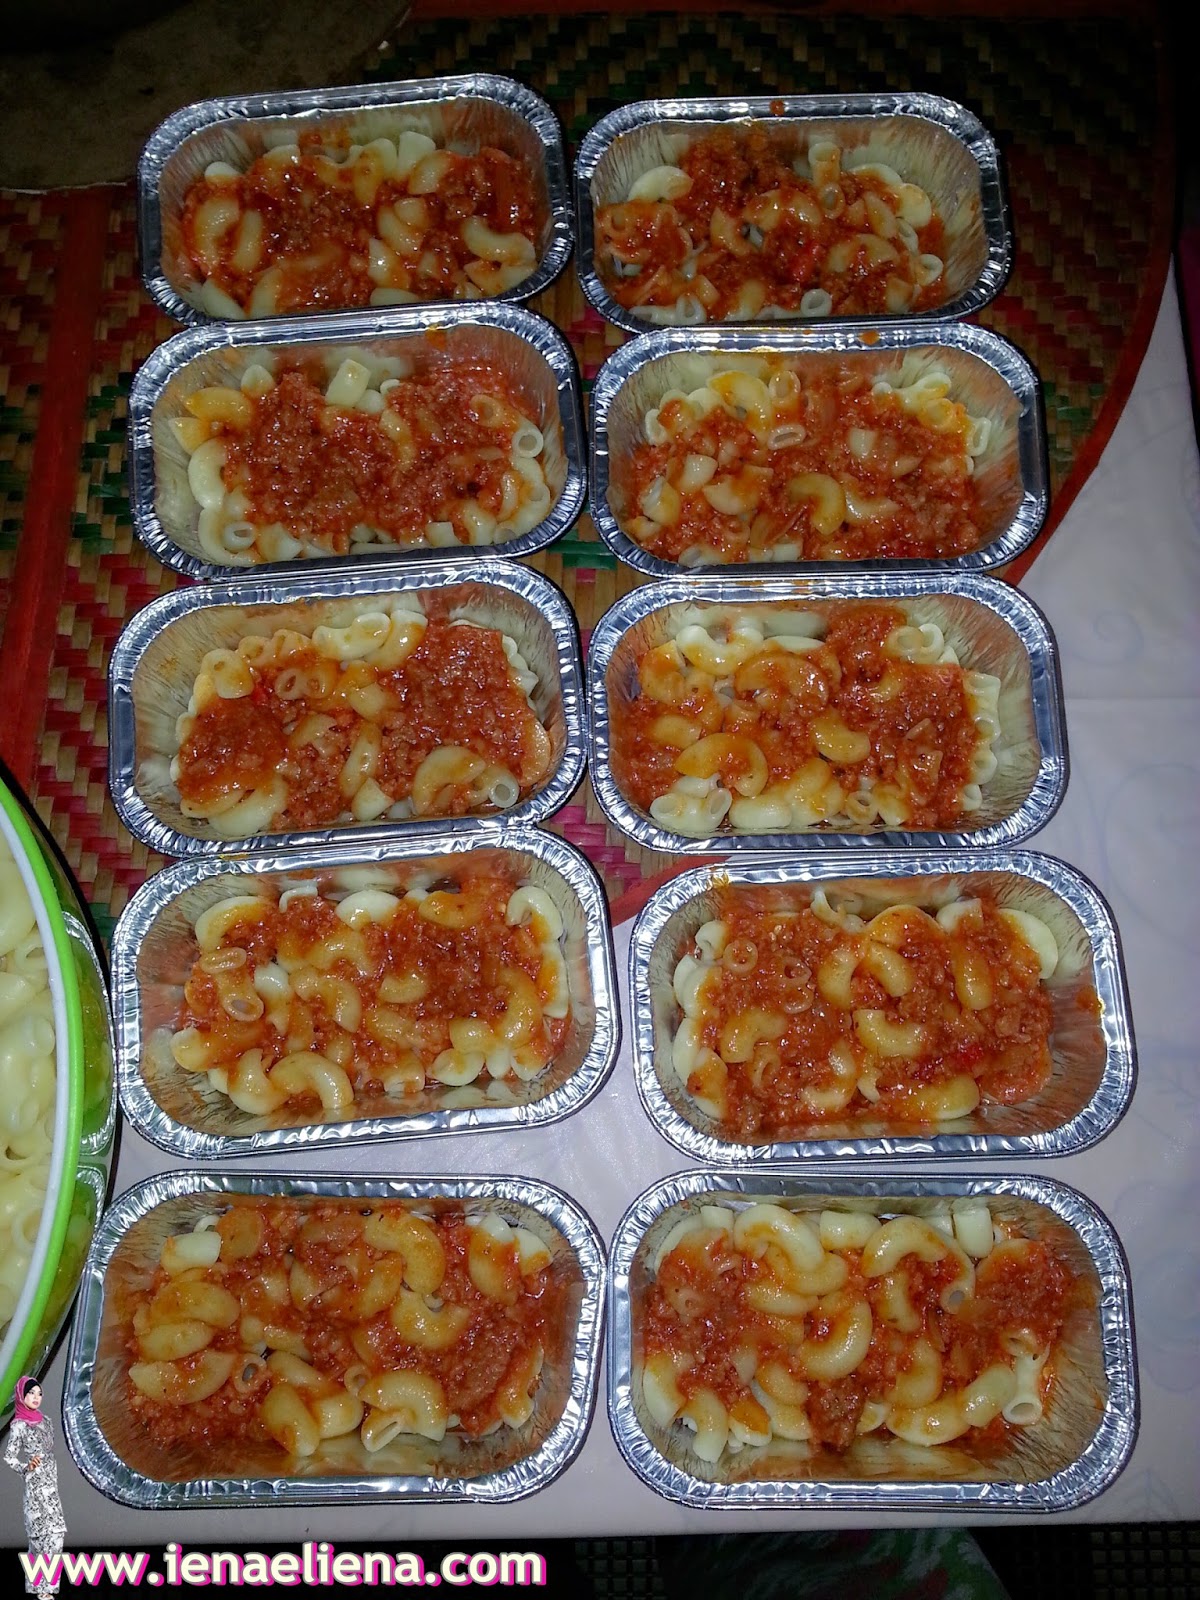 Qaseh Baked Macaroni In The Making